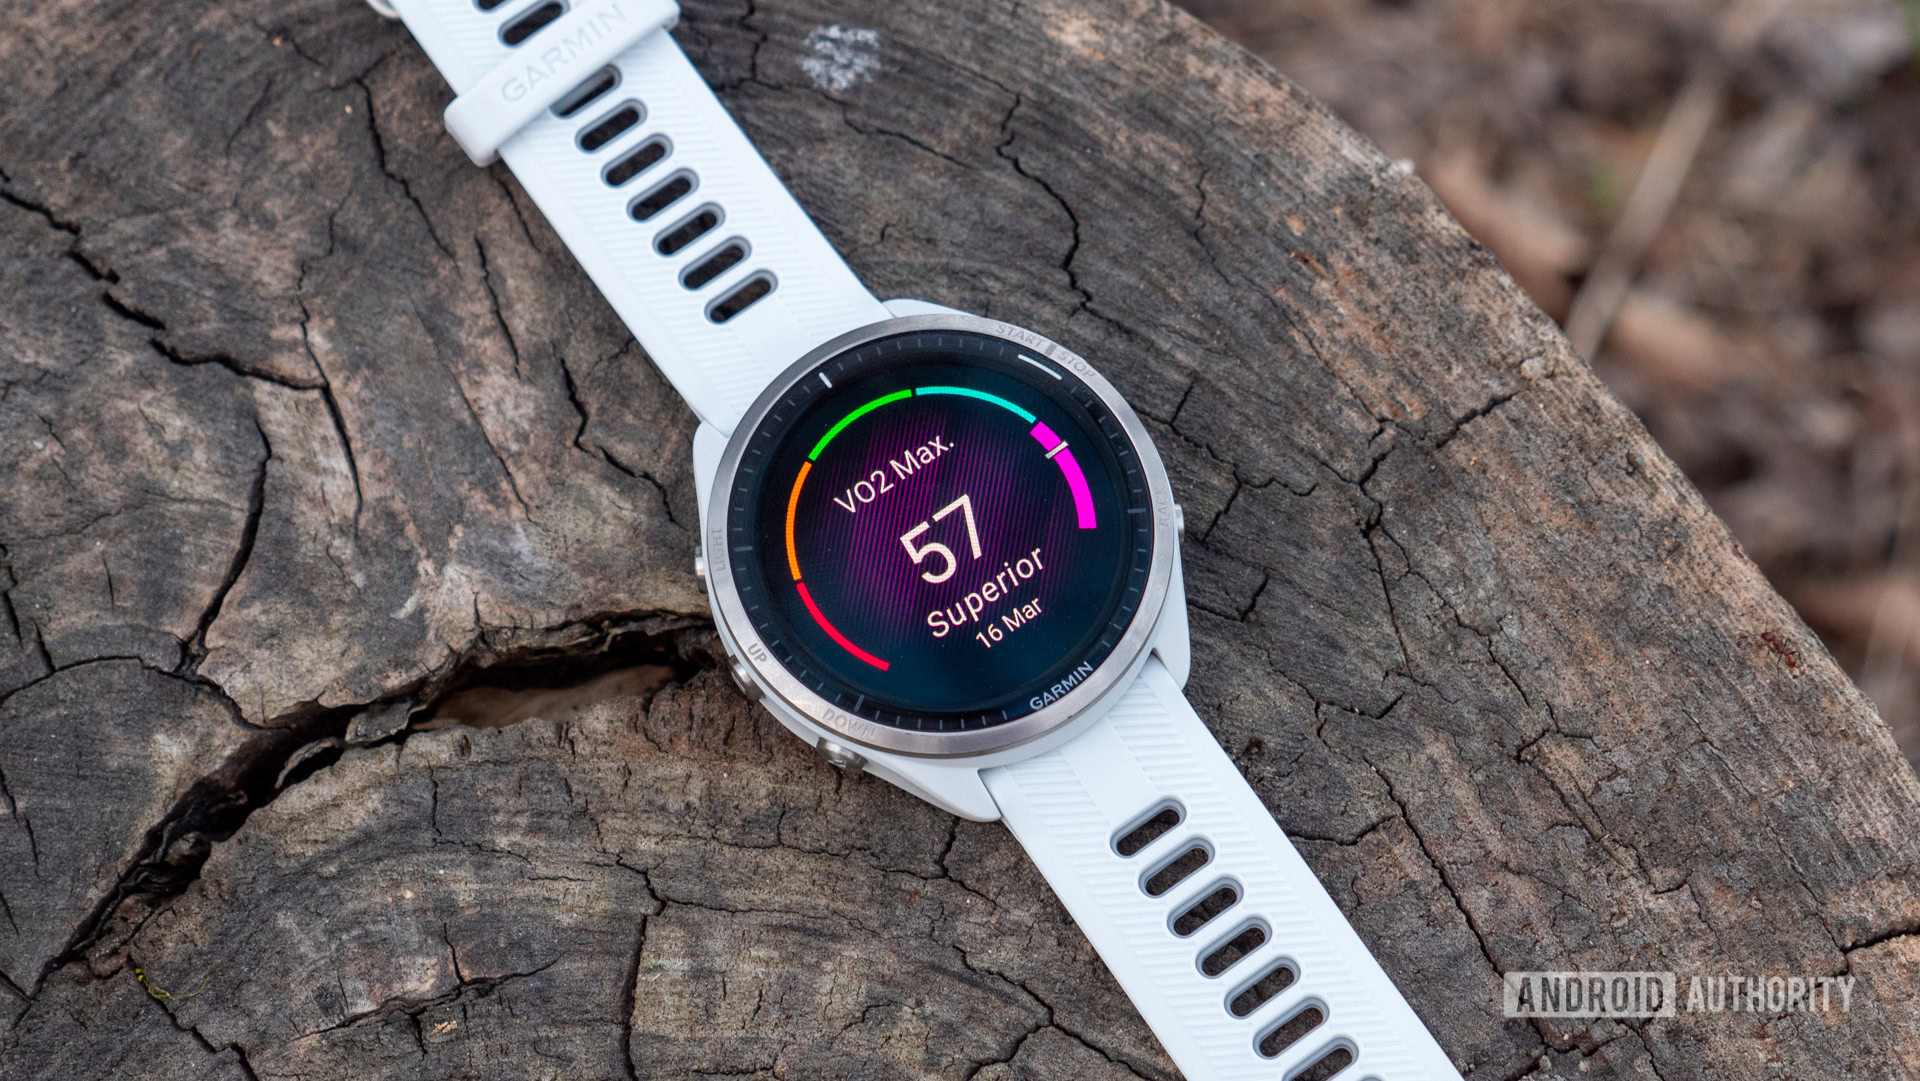 Garmin Forerunner 965 In-Depth Review: Now with AMOLED Display!